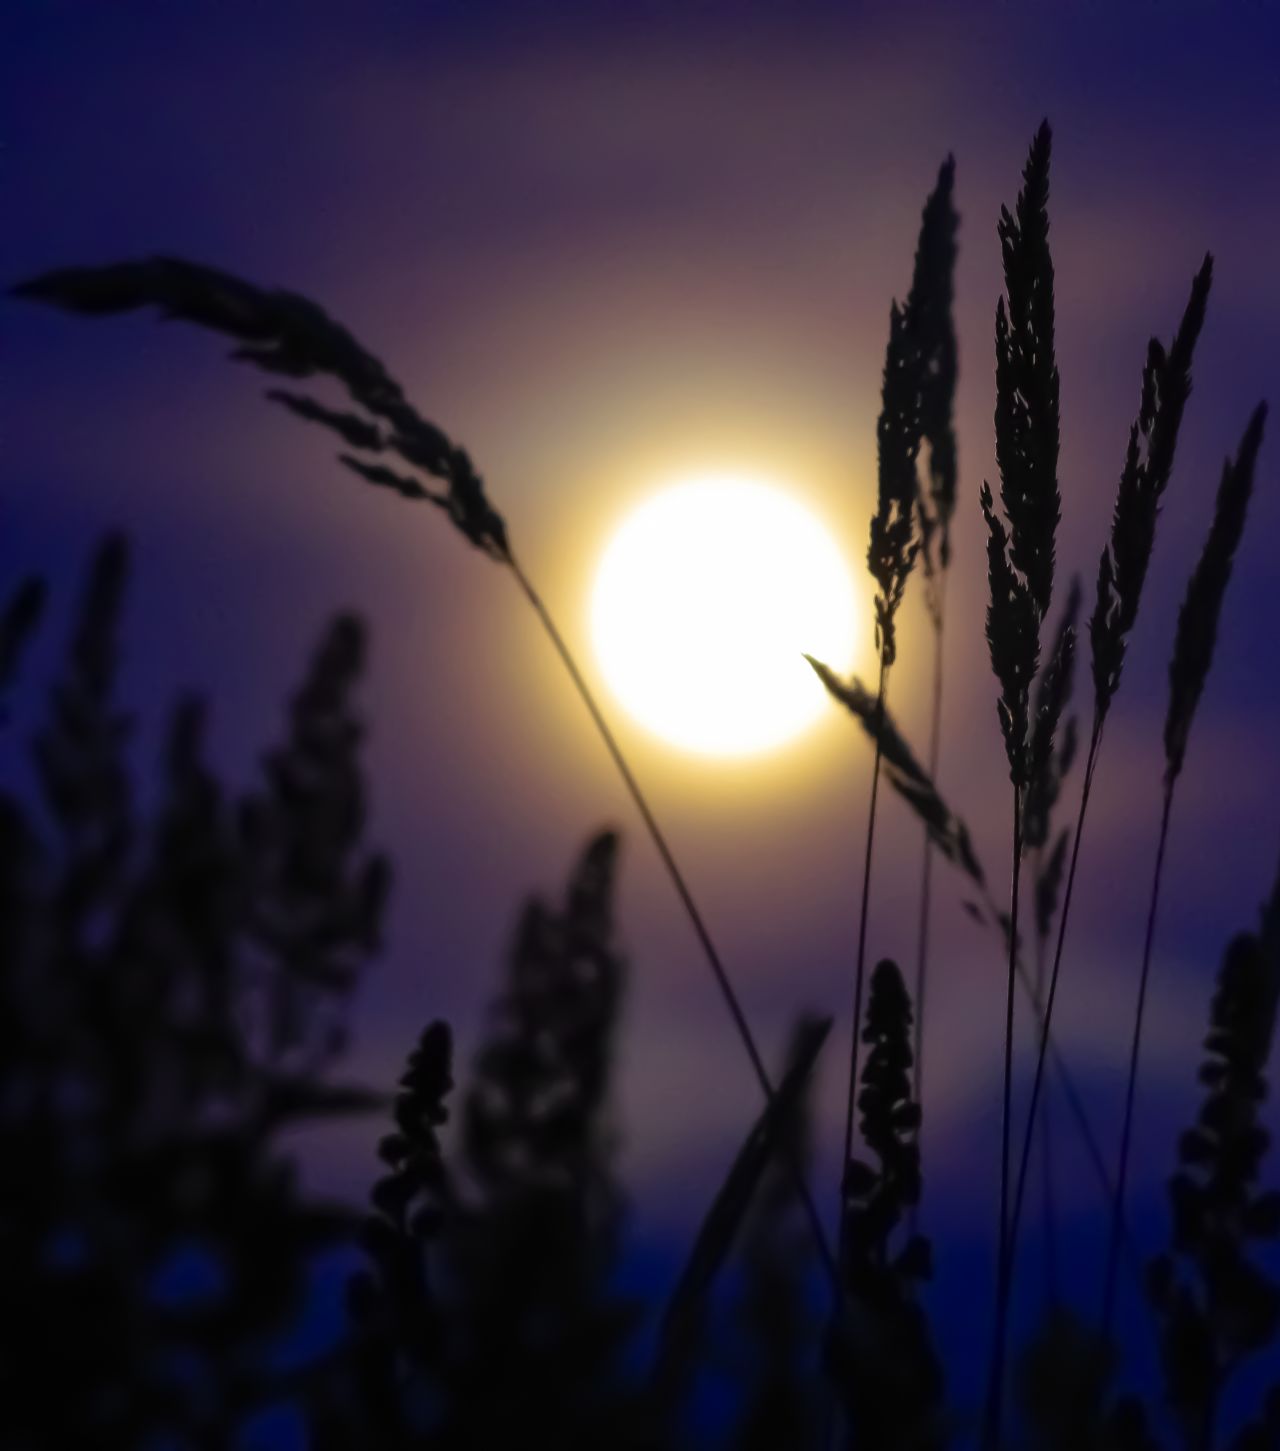 <a href="http://ireport.cnn.com/docs/DOC-993827">Daniel Mueller</a> shot this image of the supermoon in Portland, Oregon, as it peeked through the grass stalks. Also an amateur astronomer, Mueller says, "I find that photography and astronomy are both contemplative and humbling pursuits."